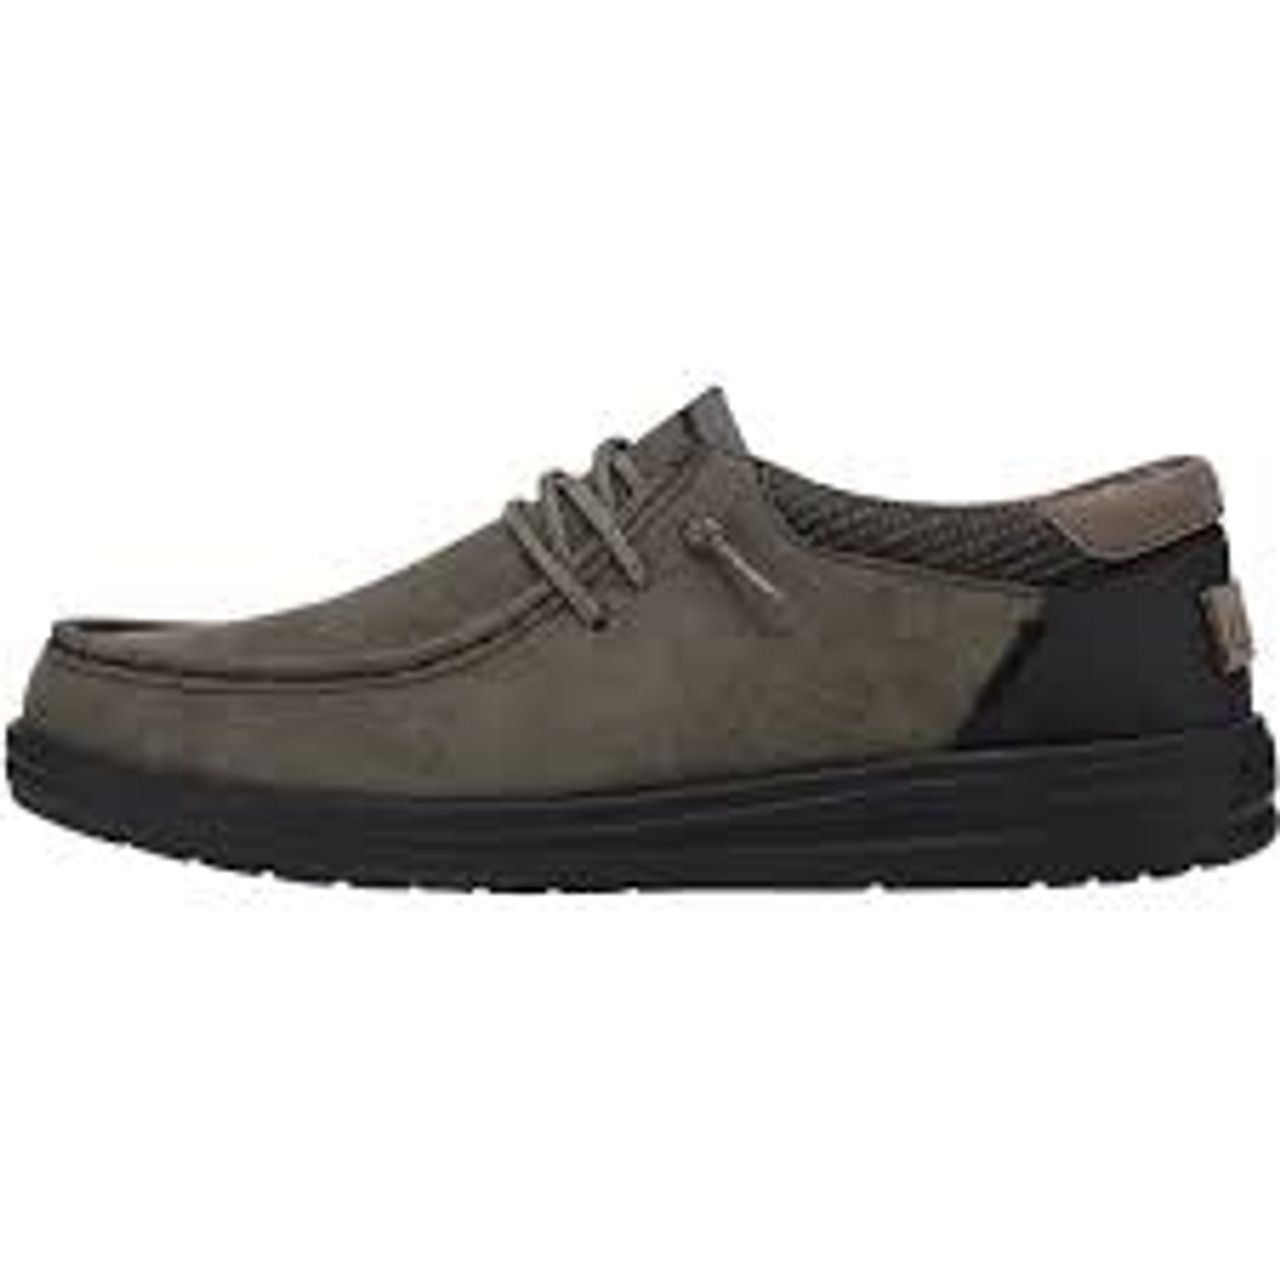 Hey Dude Shoes - Paul - Dust Olive - Surf and Dirt